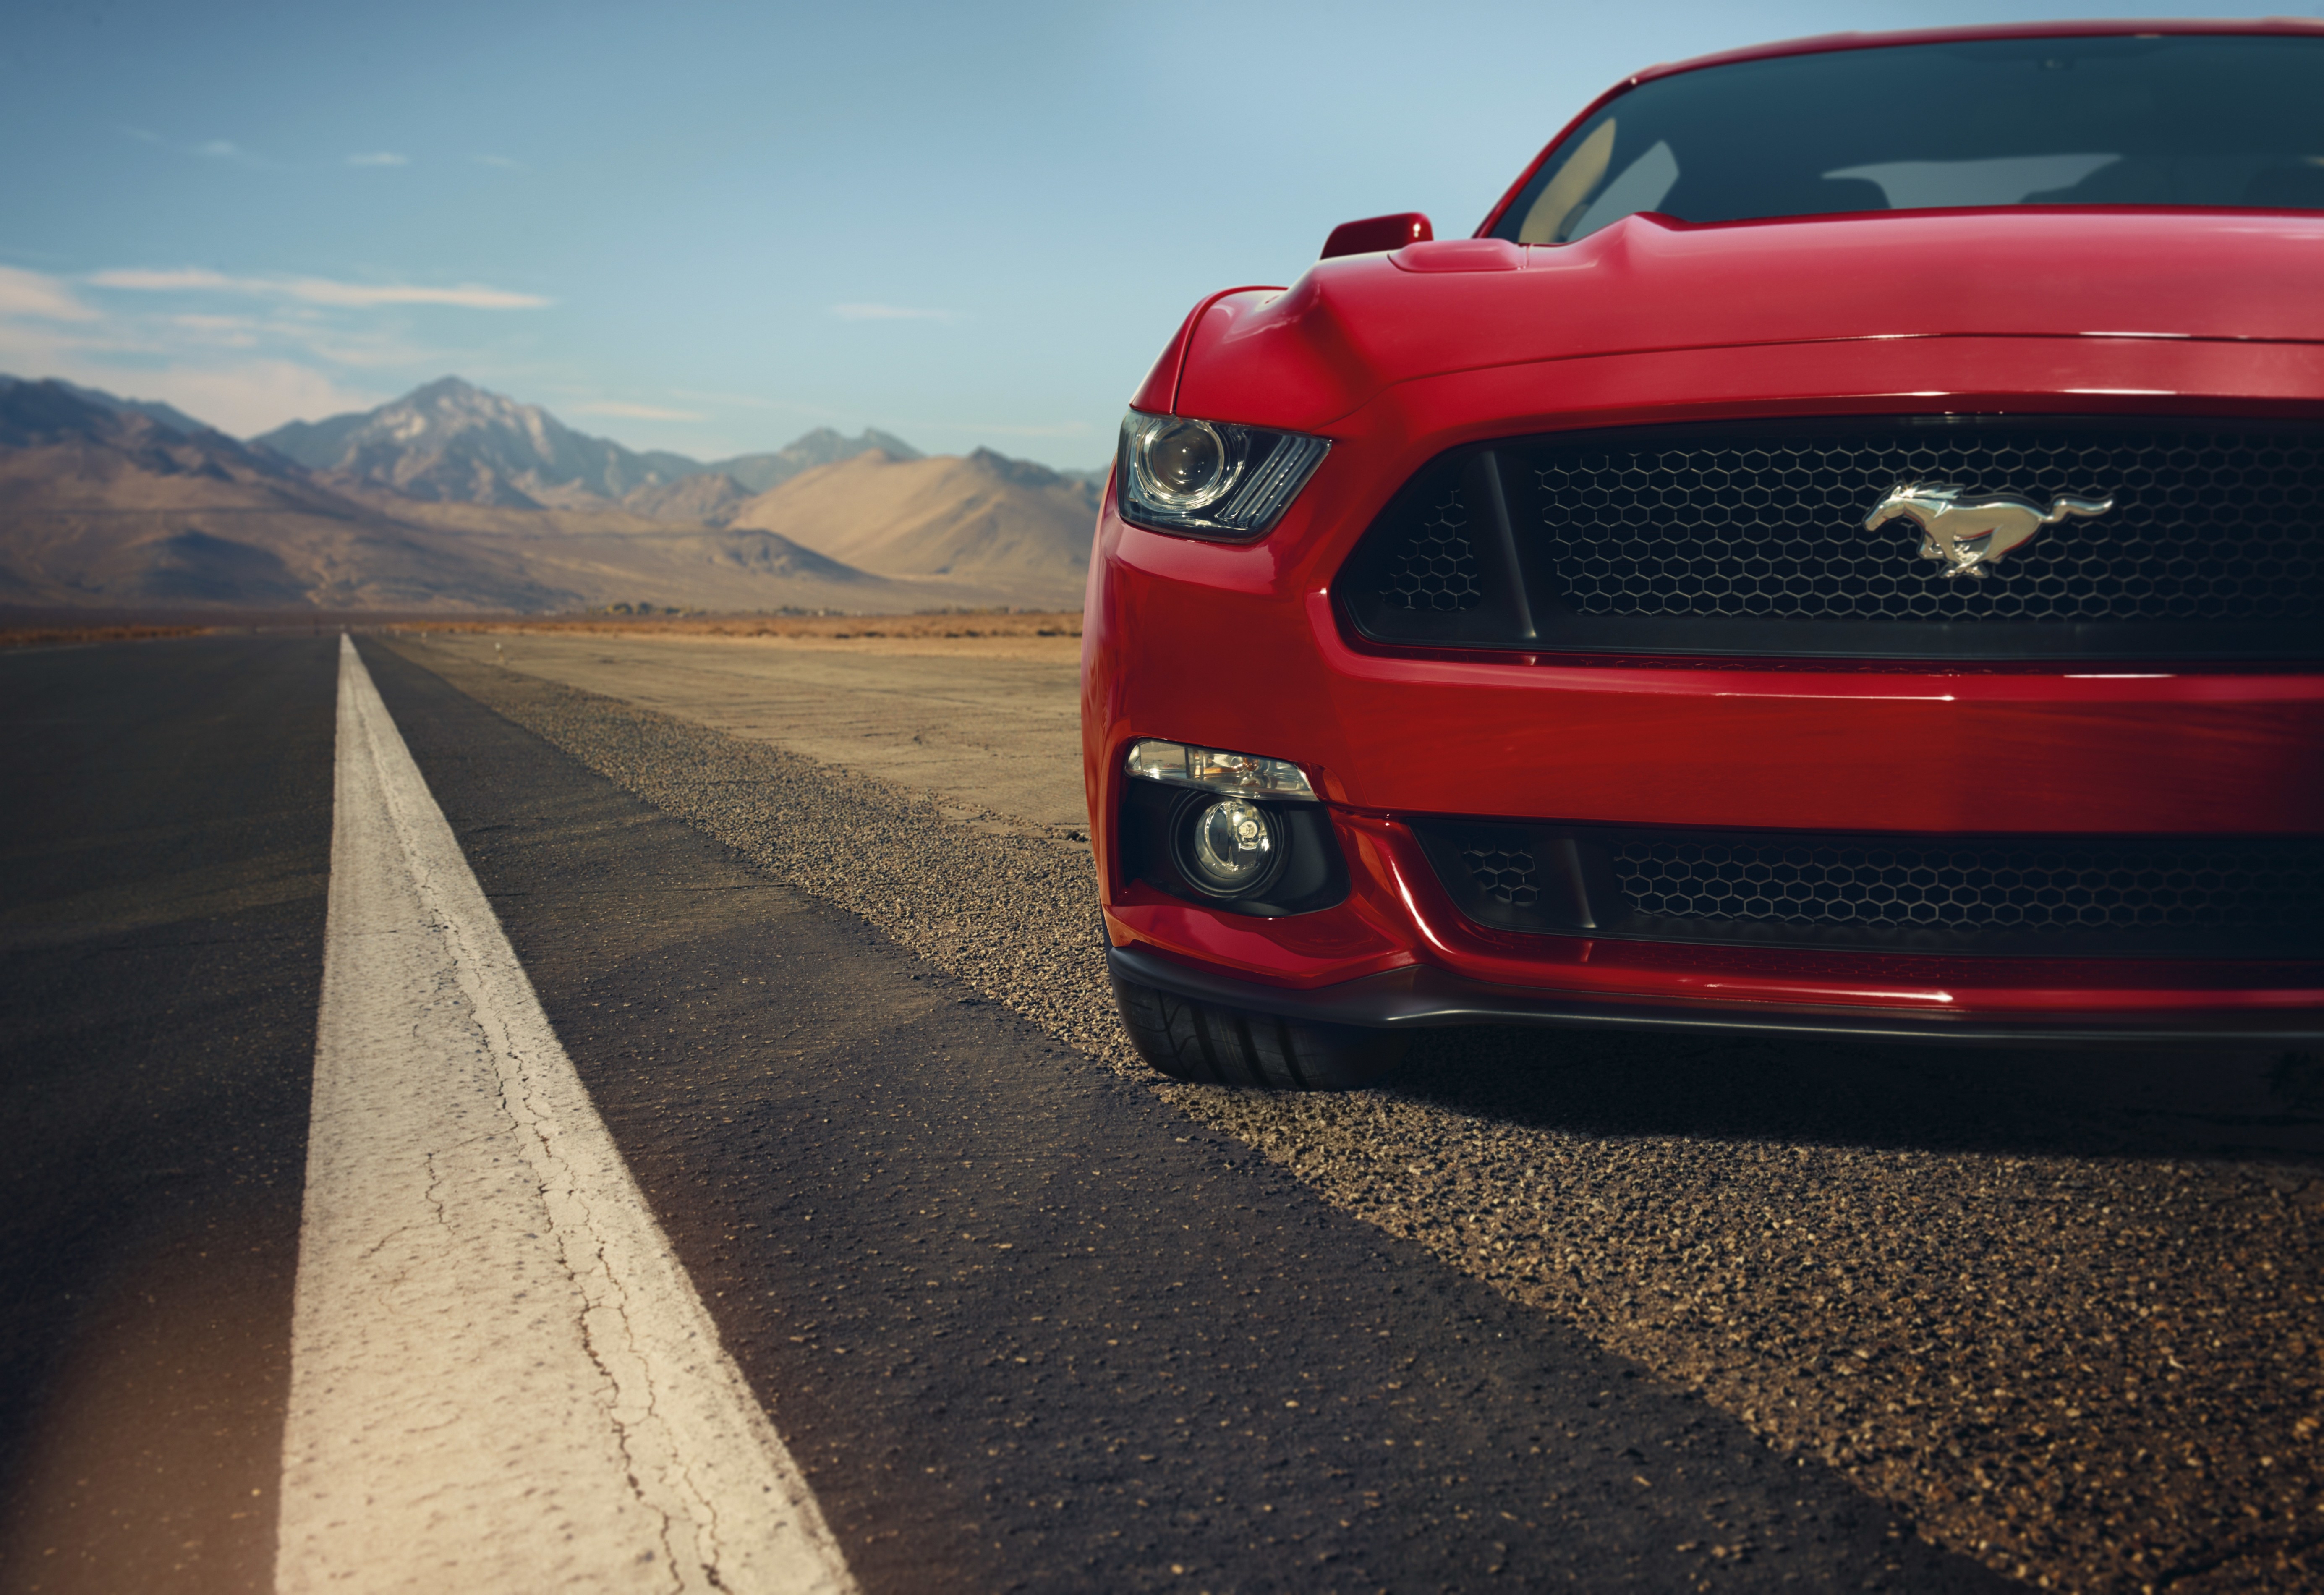 Car Muscle Cars Ford Ford Mustang GT Red Road Landscape Red Cars 5537x3800